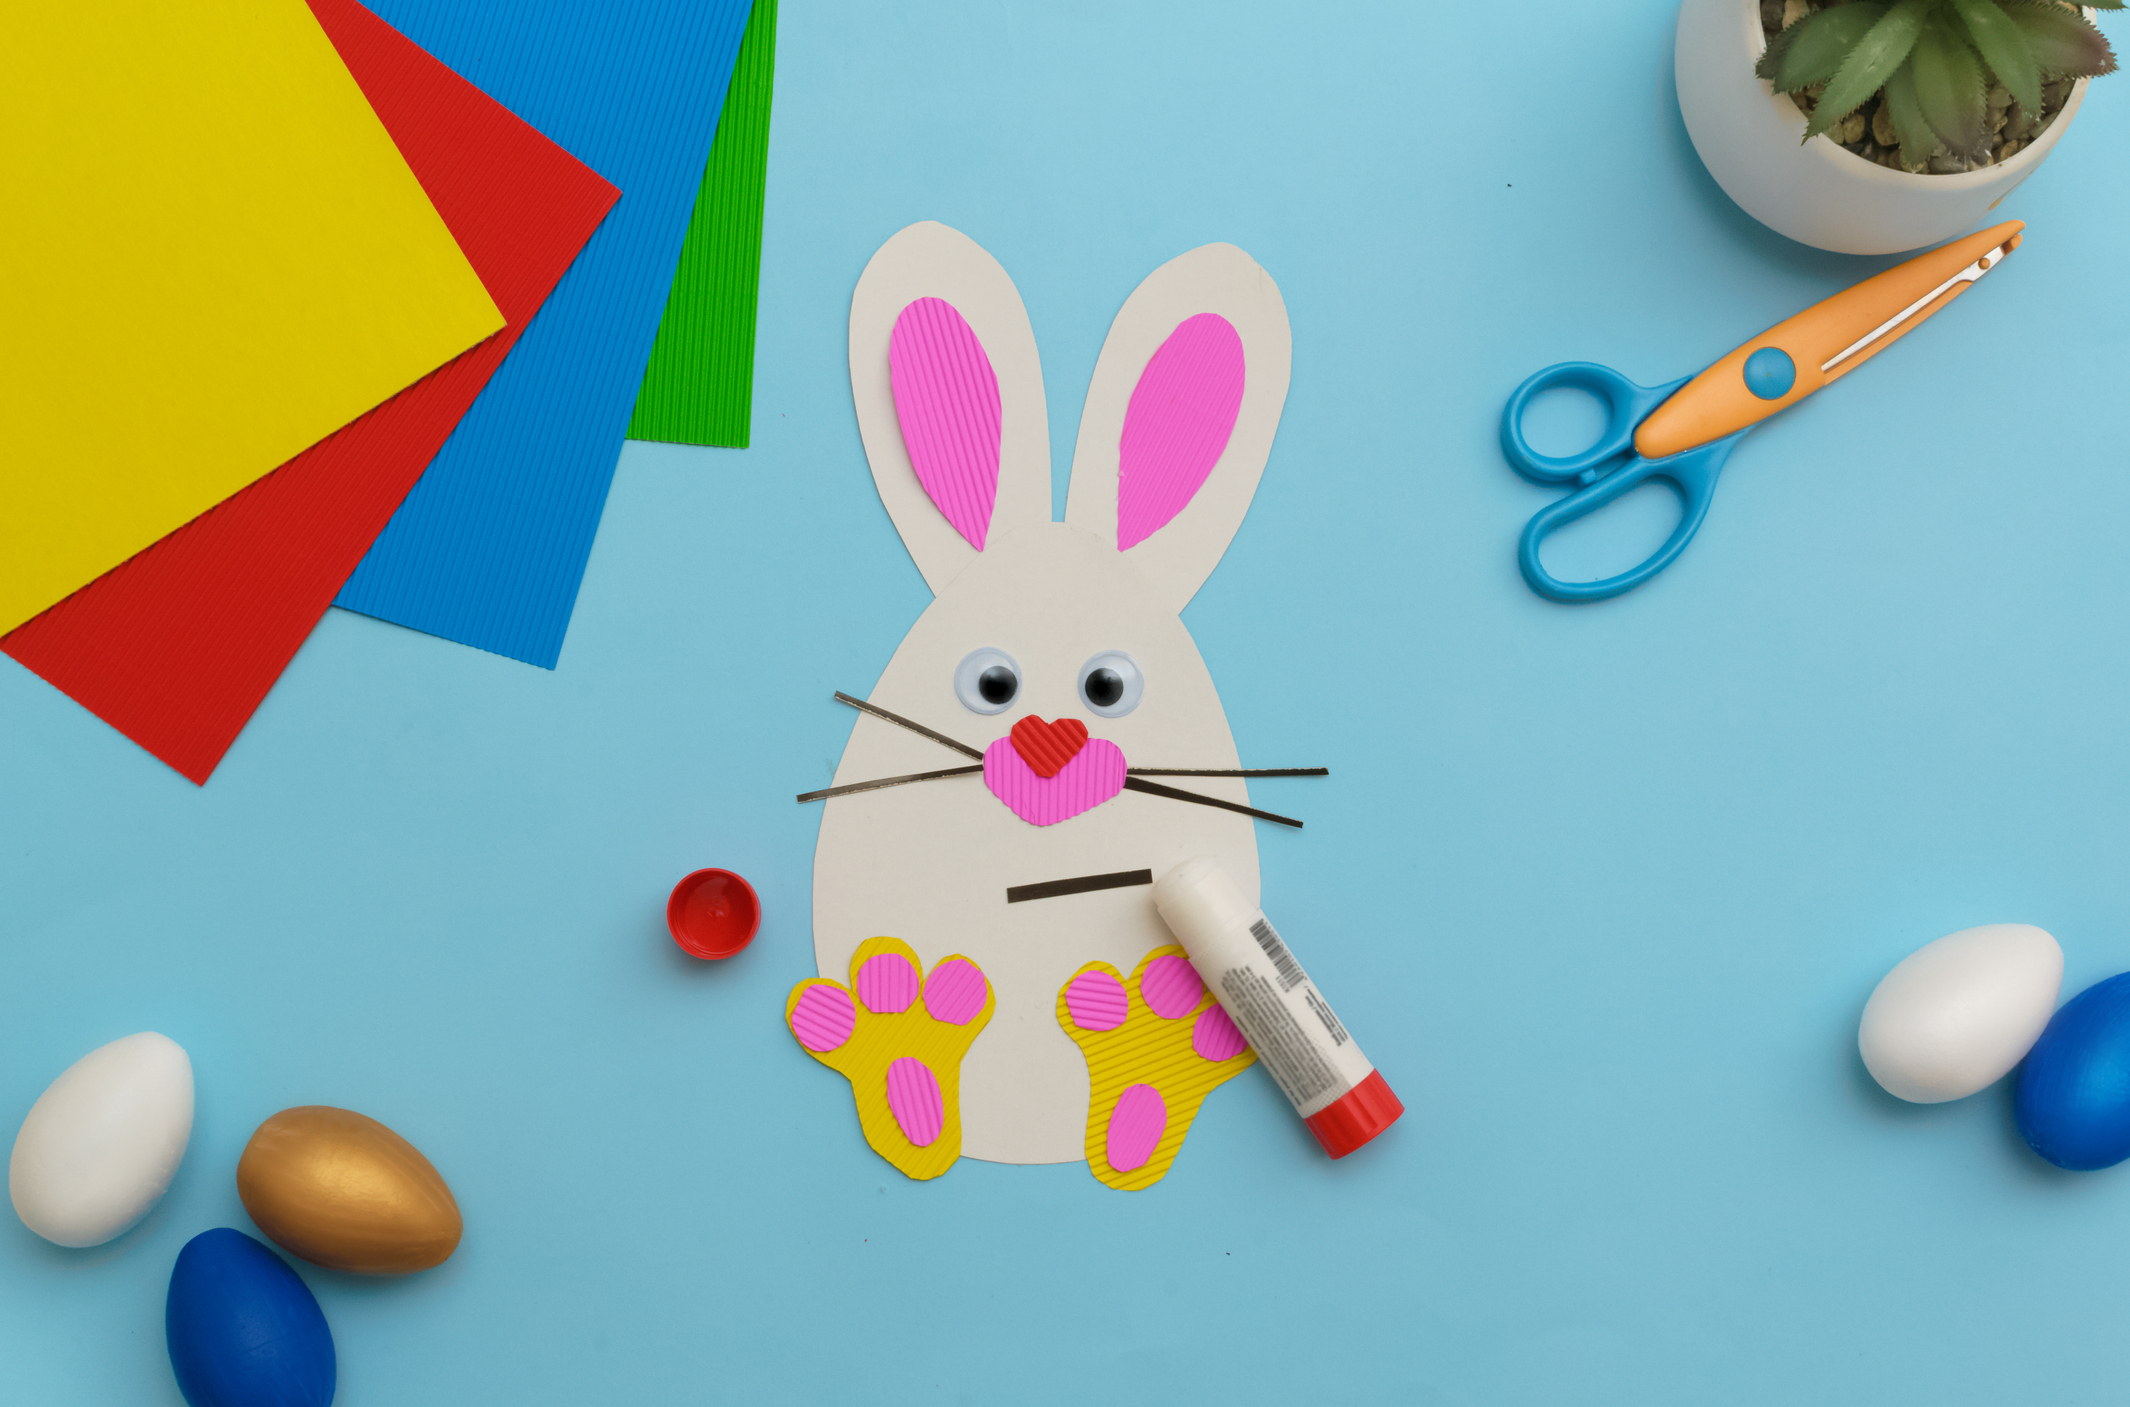 Bunny Rabbit Toilet Paper Roll Craft For Kids - Crafty Morning